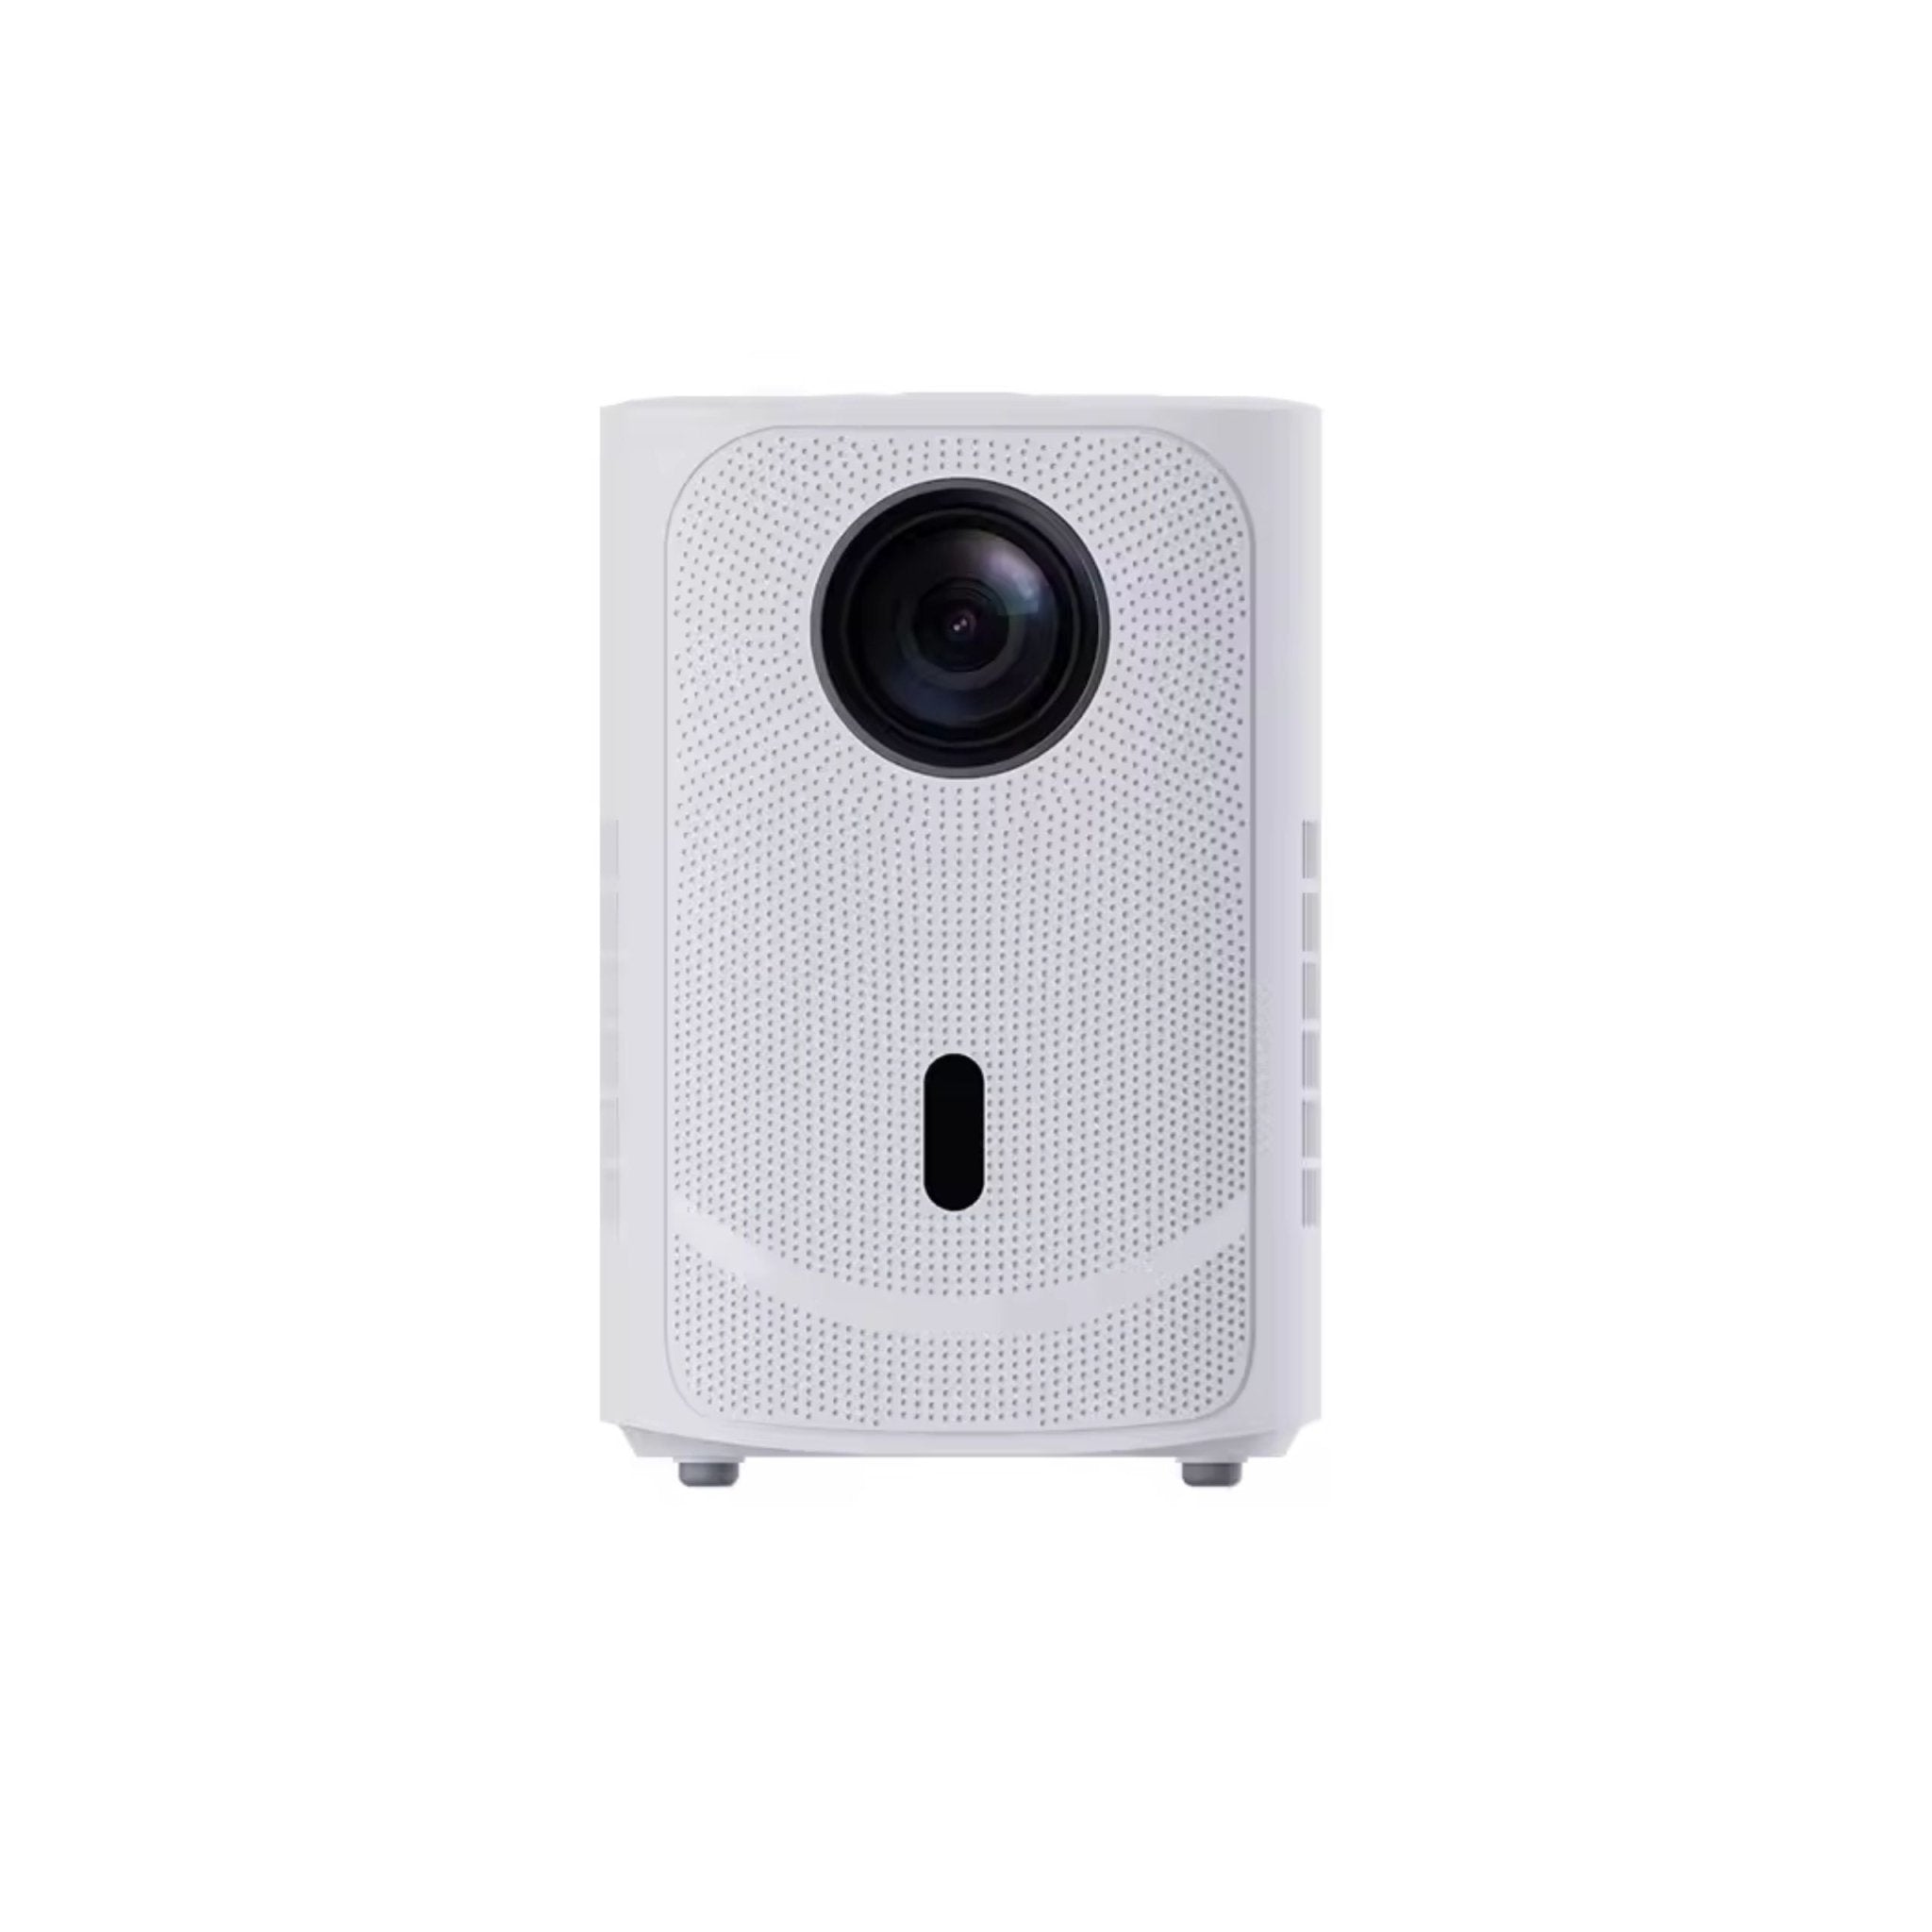 Porodo Mini Projector Wireless Mirroring Patented Dust-Proof Structure - White